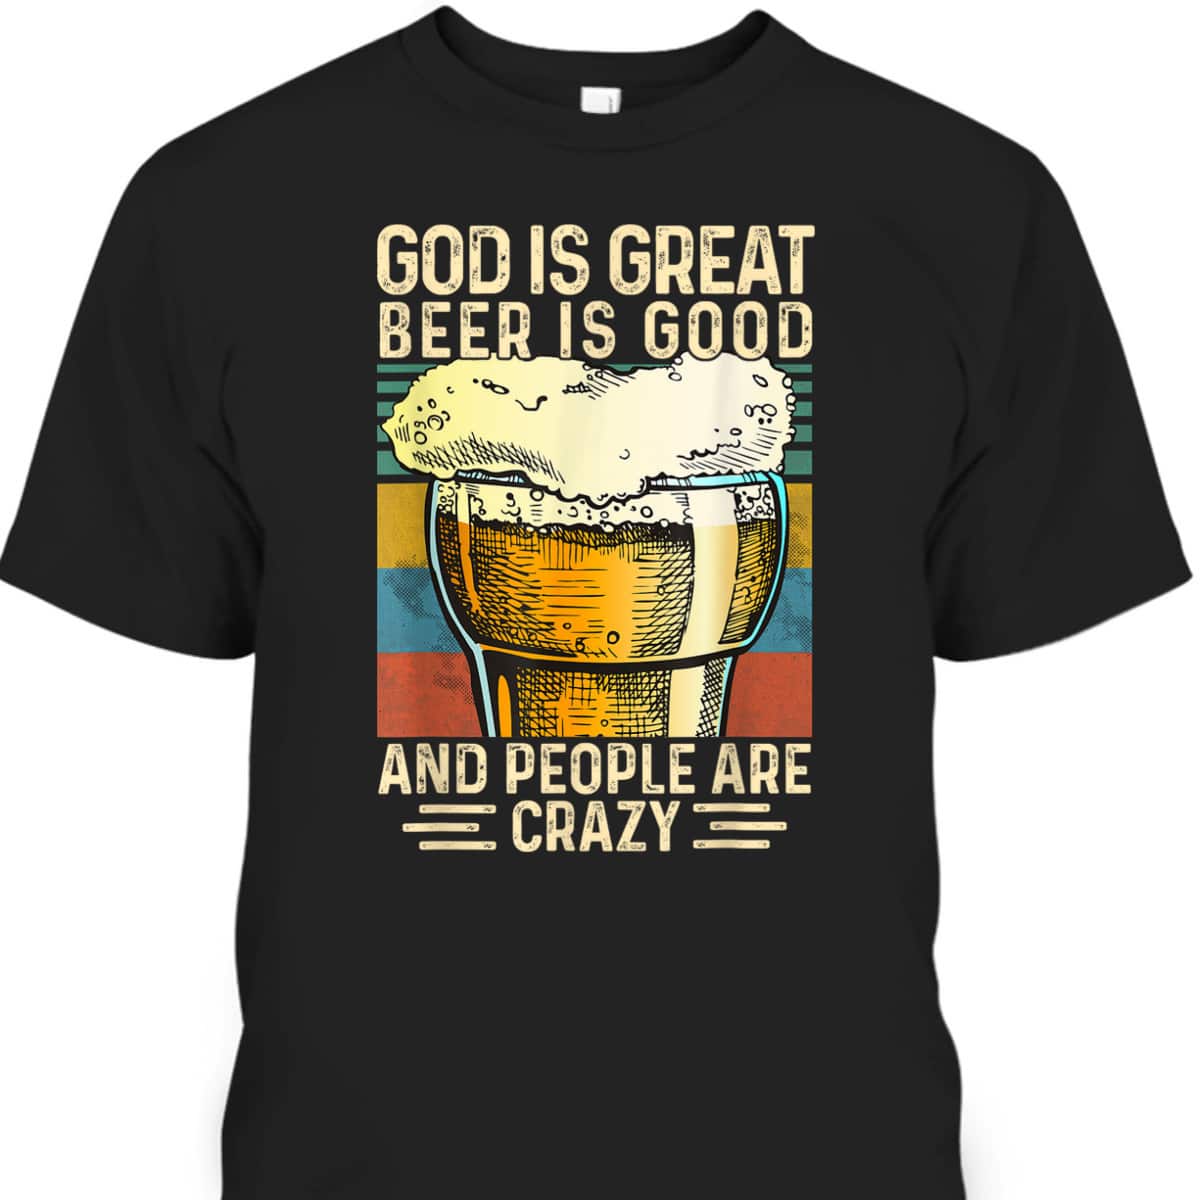 God Is Great Beer Is Good And People Are Crazy Funny Christian T-Shirt